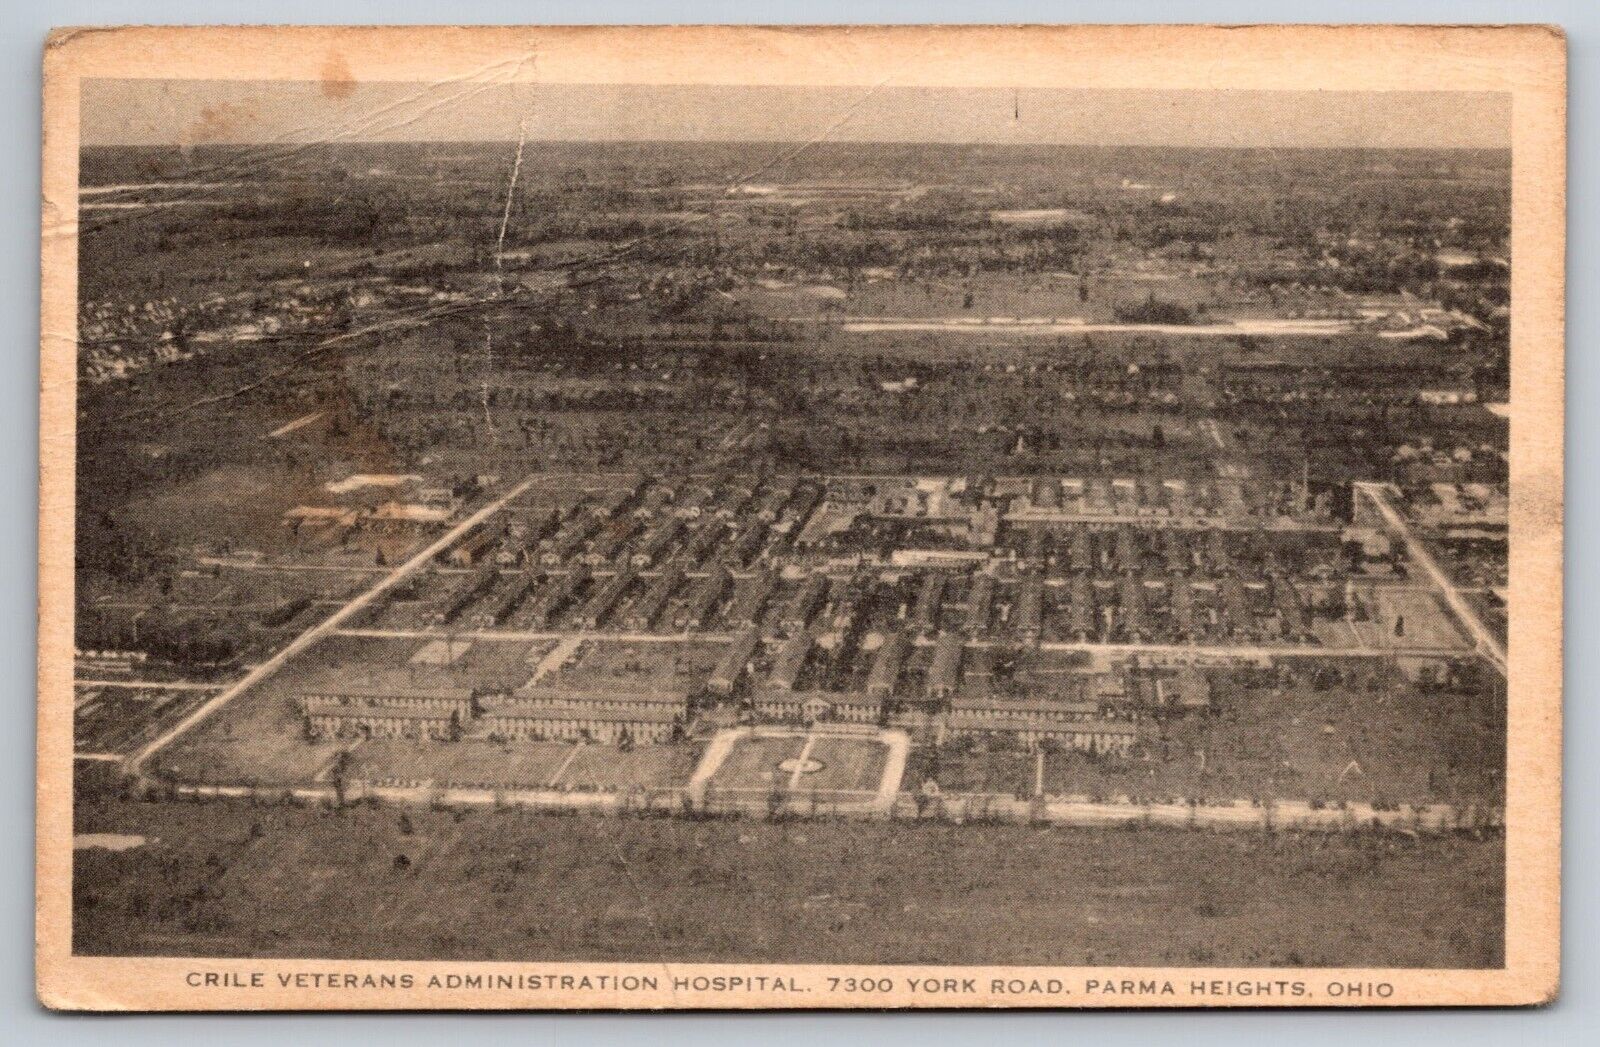 CRILE VETERANS ADMINISTRATION HOSPITAL PARMA HEIGHTS OHIO AERIAL VIEW POSTCARD